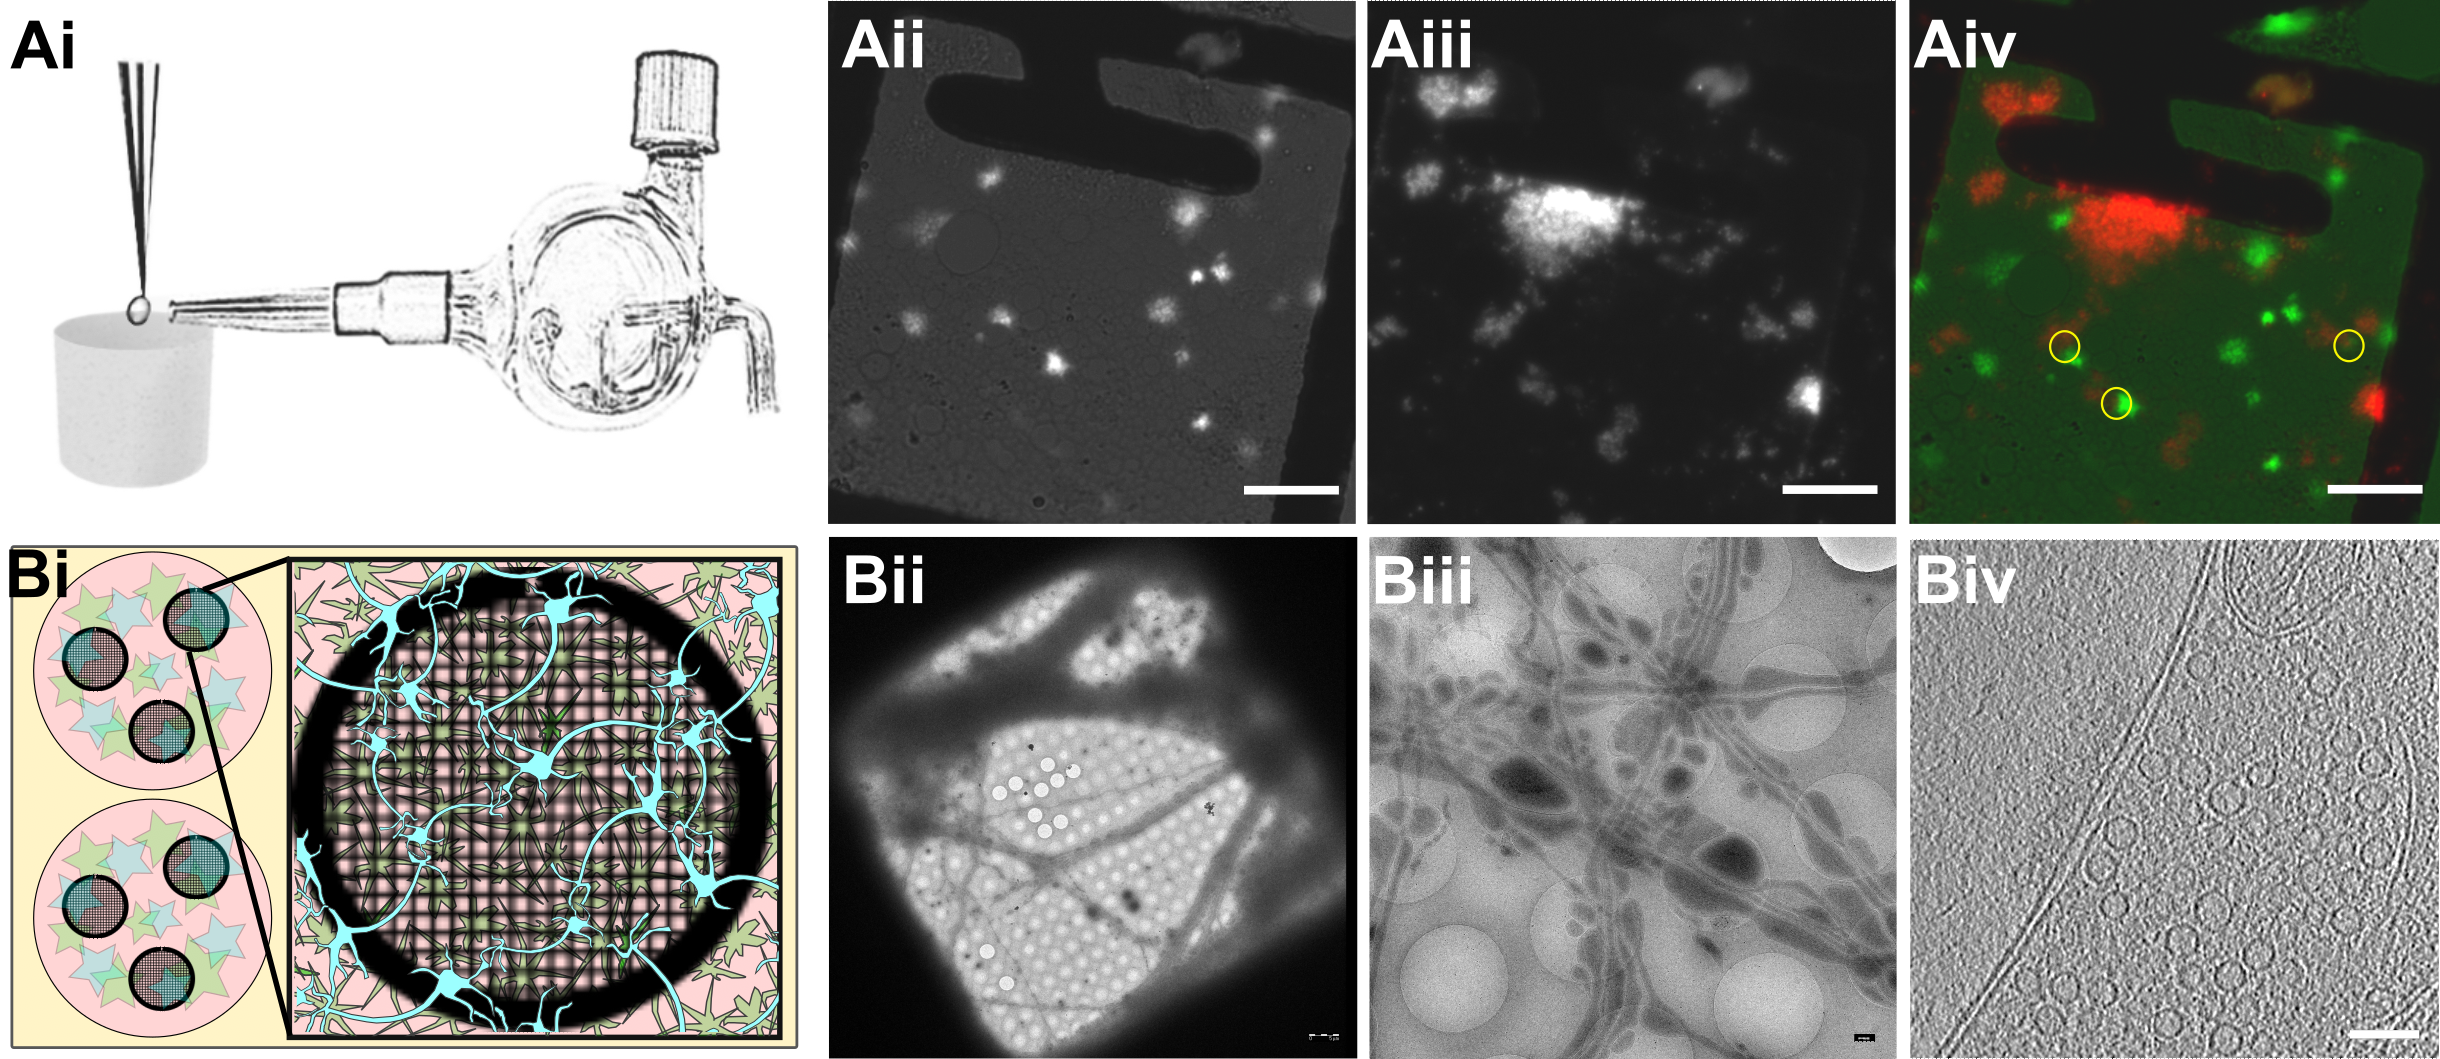 Figure 1: Experimental models. Ai) Glass atomizer used to disperse depolarizing solution on the EM grid milliseconds before the grid is vitrified. Aii) Spray droplets imaged with the GFP filter set. Scale bars, 20 μm. Aiii) Synaptosomes imaged with the DAPI filter set. Scale bar, 20 μm. Aiv) Overlay of spray droplets (green) and synaptosomes (red). Yellow circles show contact between droplets and synaptosomes in thin area, which is suitable for cryo-ET. Scale bar, 20 μm. Bi) Schematic drawing of a 6-well Petri dish depicting astrocytes (pink) growing at the bottom of the Petri dish below EM grids (black round grid overlaying the astrocytes) with neurons (blue) growing on top of the grids. Bii) Grid square overview with neurons growing over it. Scale bar, 5 µm. Biii) Medium magnification overview of neurons growing over R2/1 holes. Scale bar, 500 nm. Biv) One slice of a tomogram depicting a synapse. Scale bar, 100 nm.